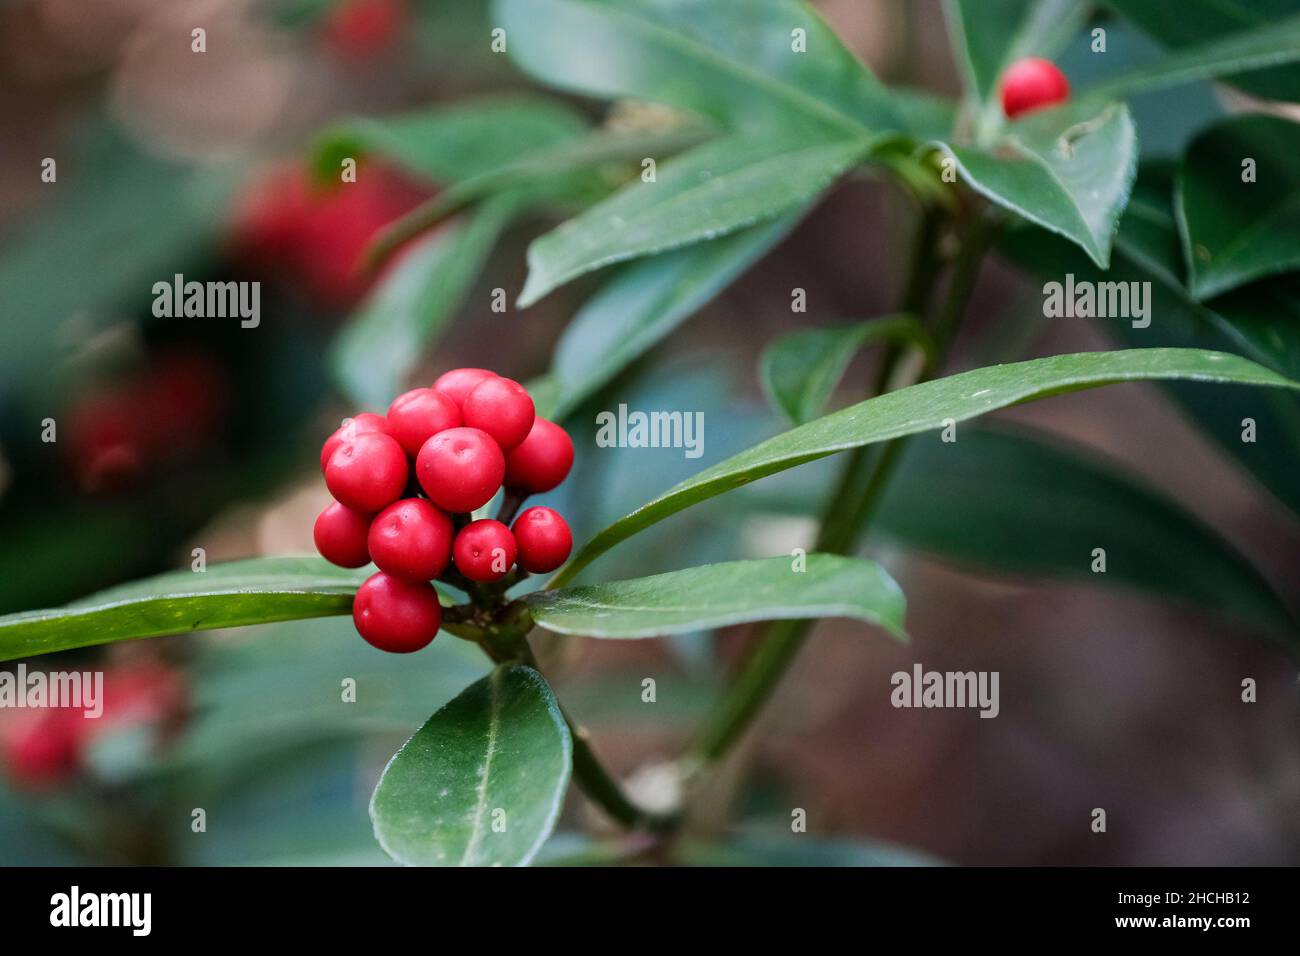 Skimmia japonica subsp. reevesiana (hermaphrodite). Japanese skimmia. Hermaphroditic plant, no other plant needed to produce berriesproduce berries Stock Photo